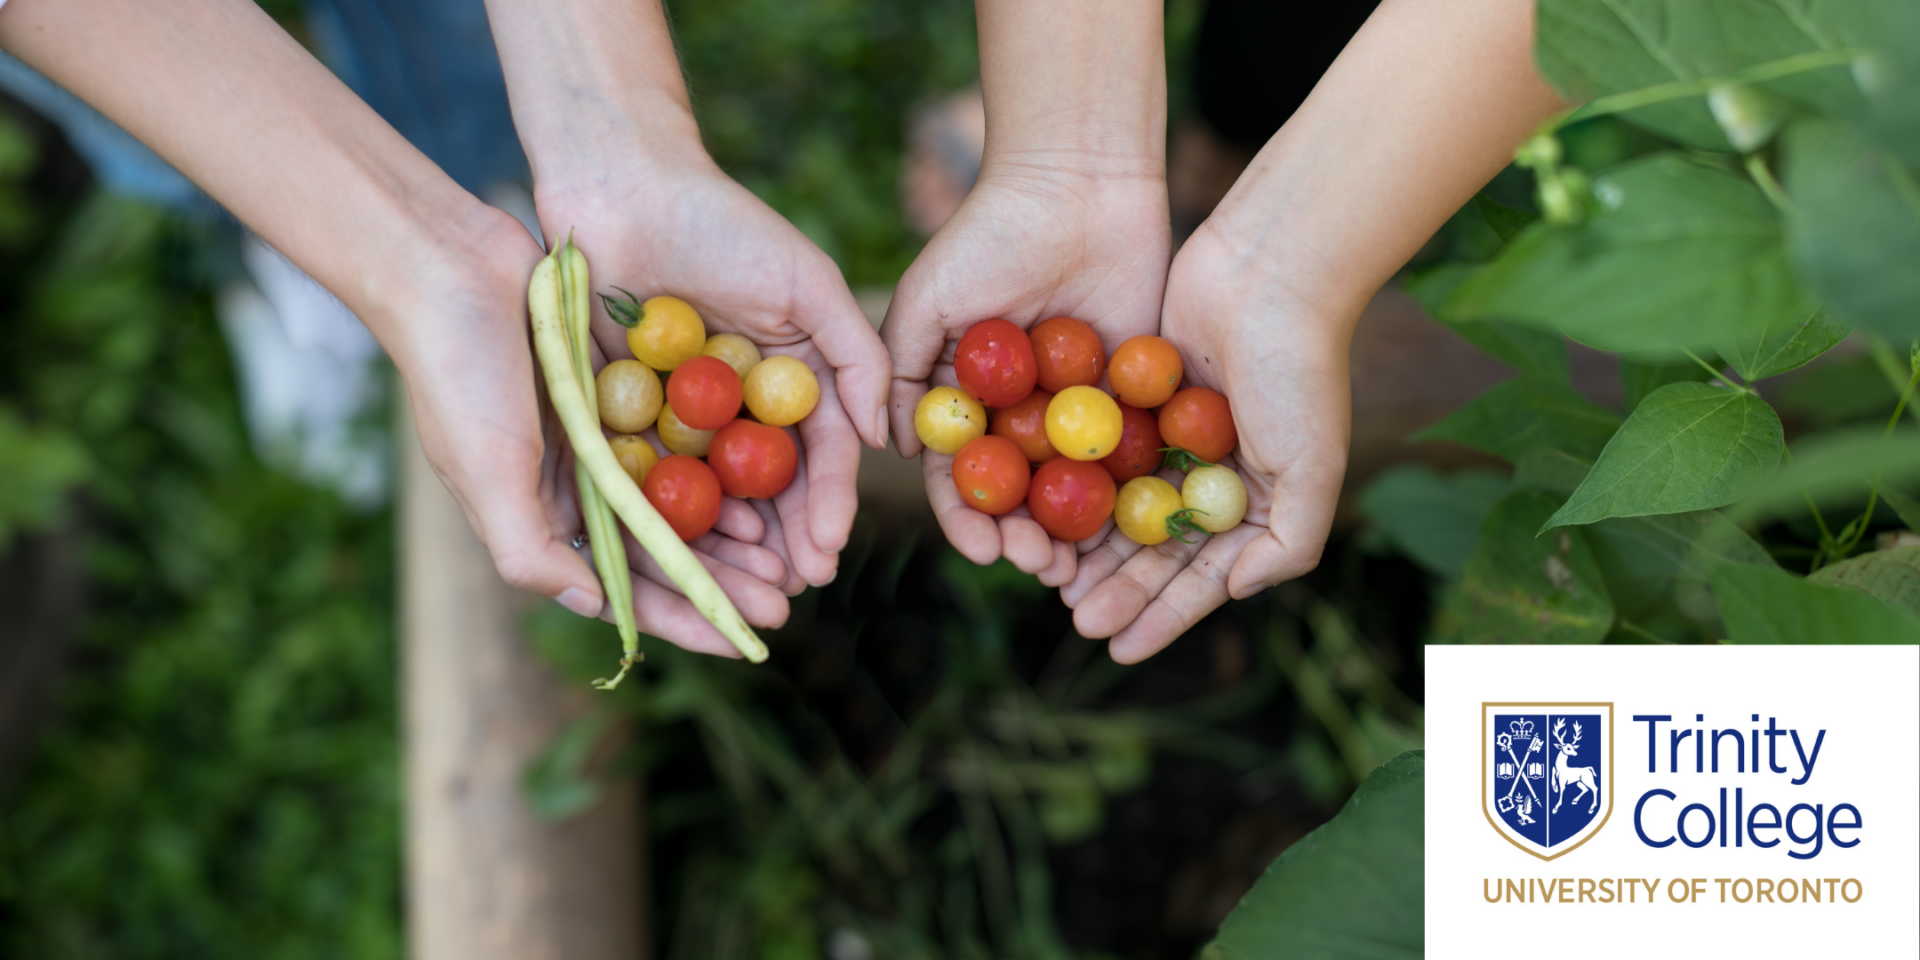 Hands holding tomatoes and beans